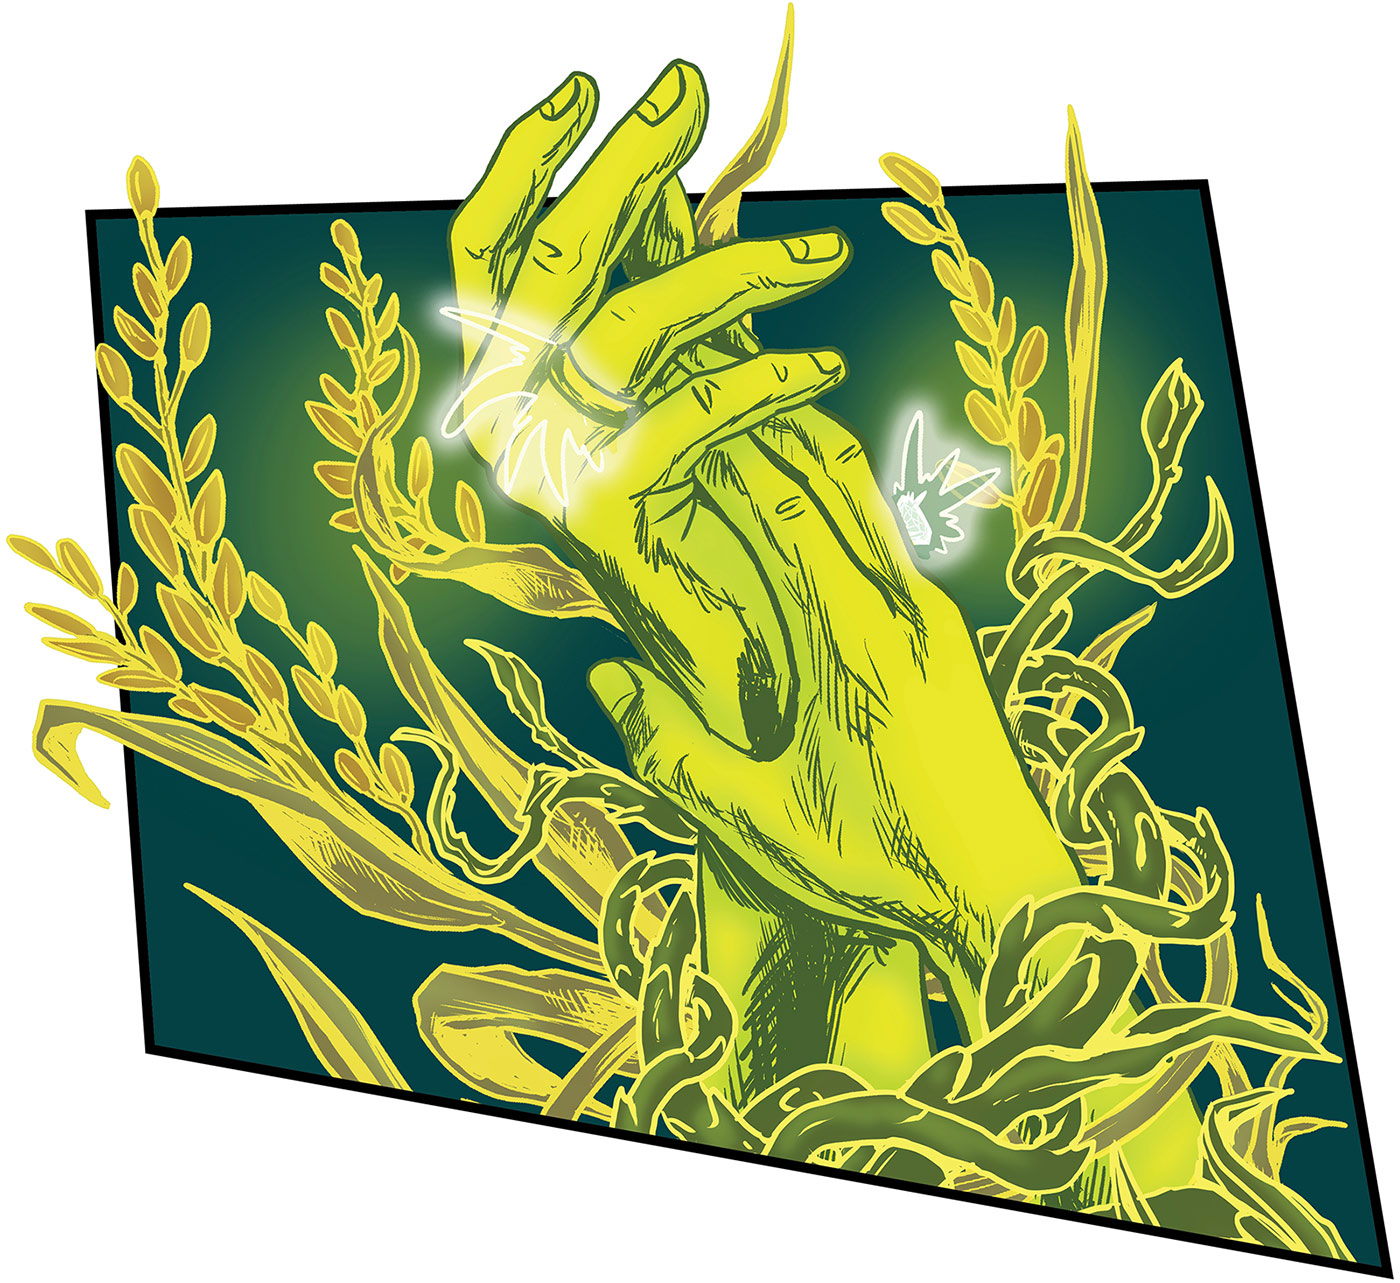 Graphic novel style drawing of two hands that appears to compelling a variety of vines and plants to grow around the hands and forearms